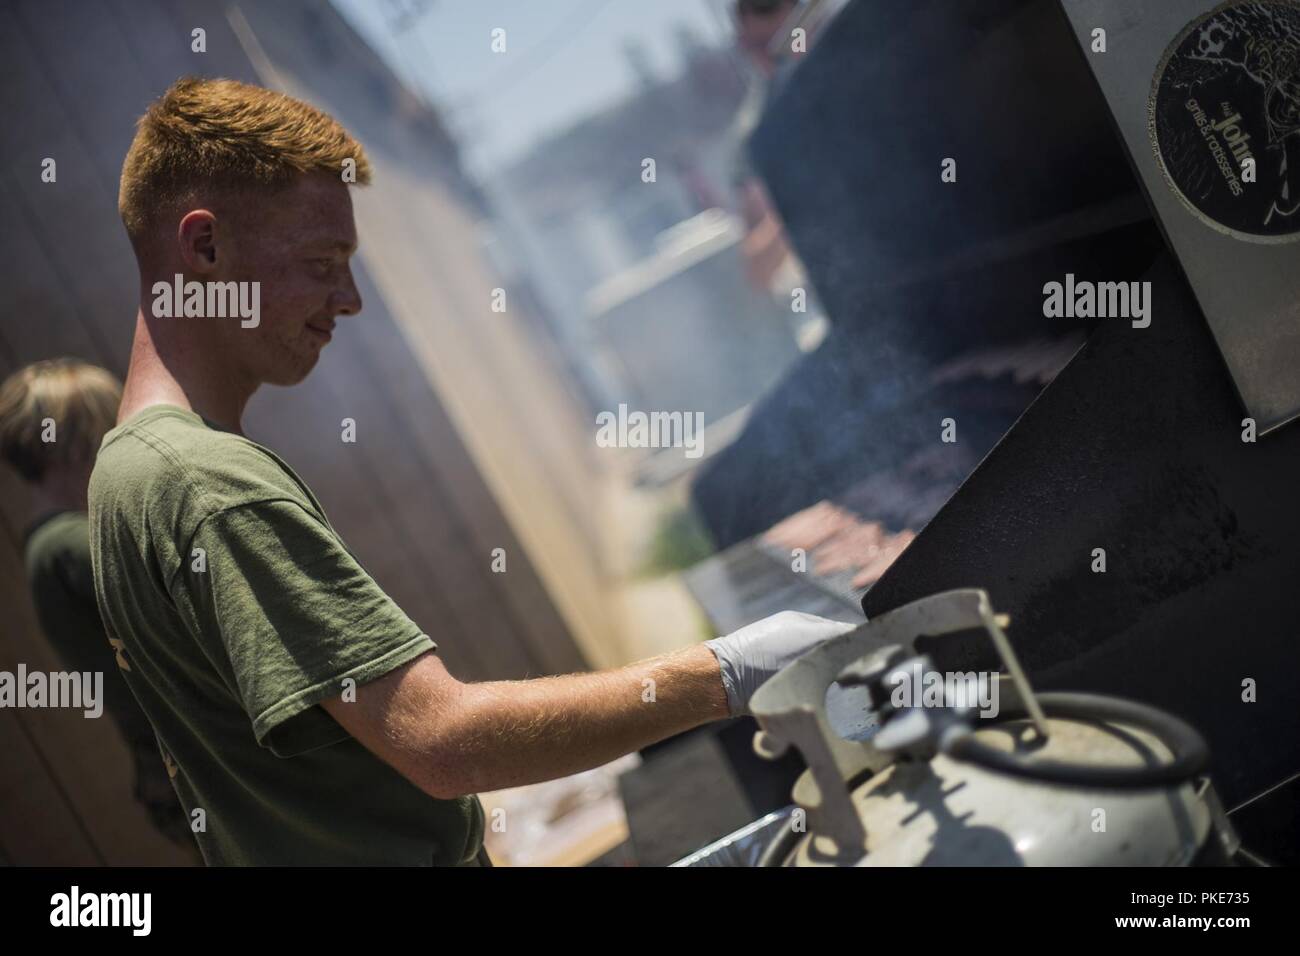 U.S. Marine Lance Cpl. Andrew Hendricks, an ammunition technician with 1st Supply Battalion, Combat Logistics Regiment 15, 1st Marine Logistics Group, cooks hamburgers during a family day event at Camp Pendleton, Calif., July 26, 2018. During family day, Marines and Sailors are encouraged to bring their families out for a day of events and fun to build camaraderie and unit cohesion. Stock Photo